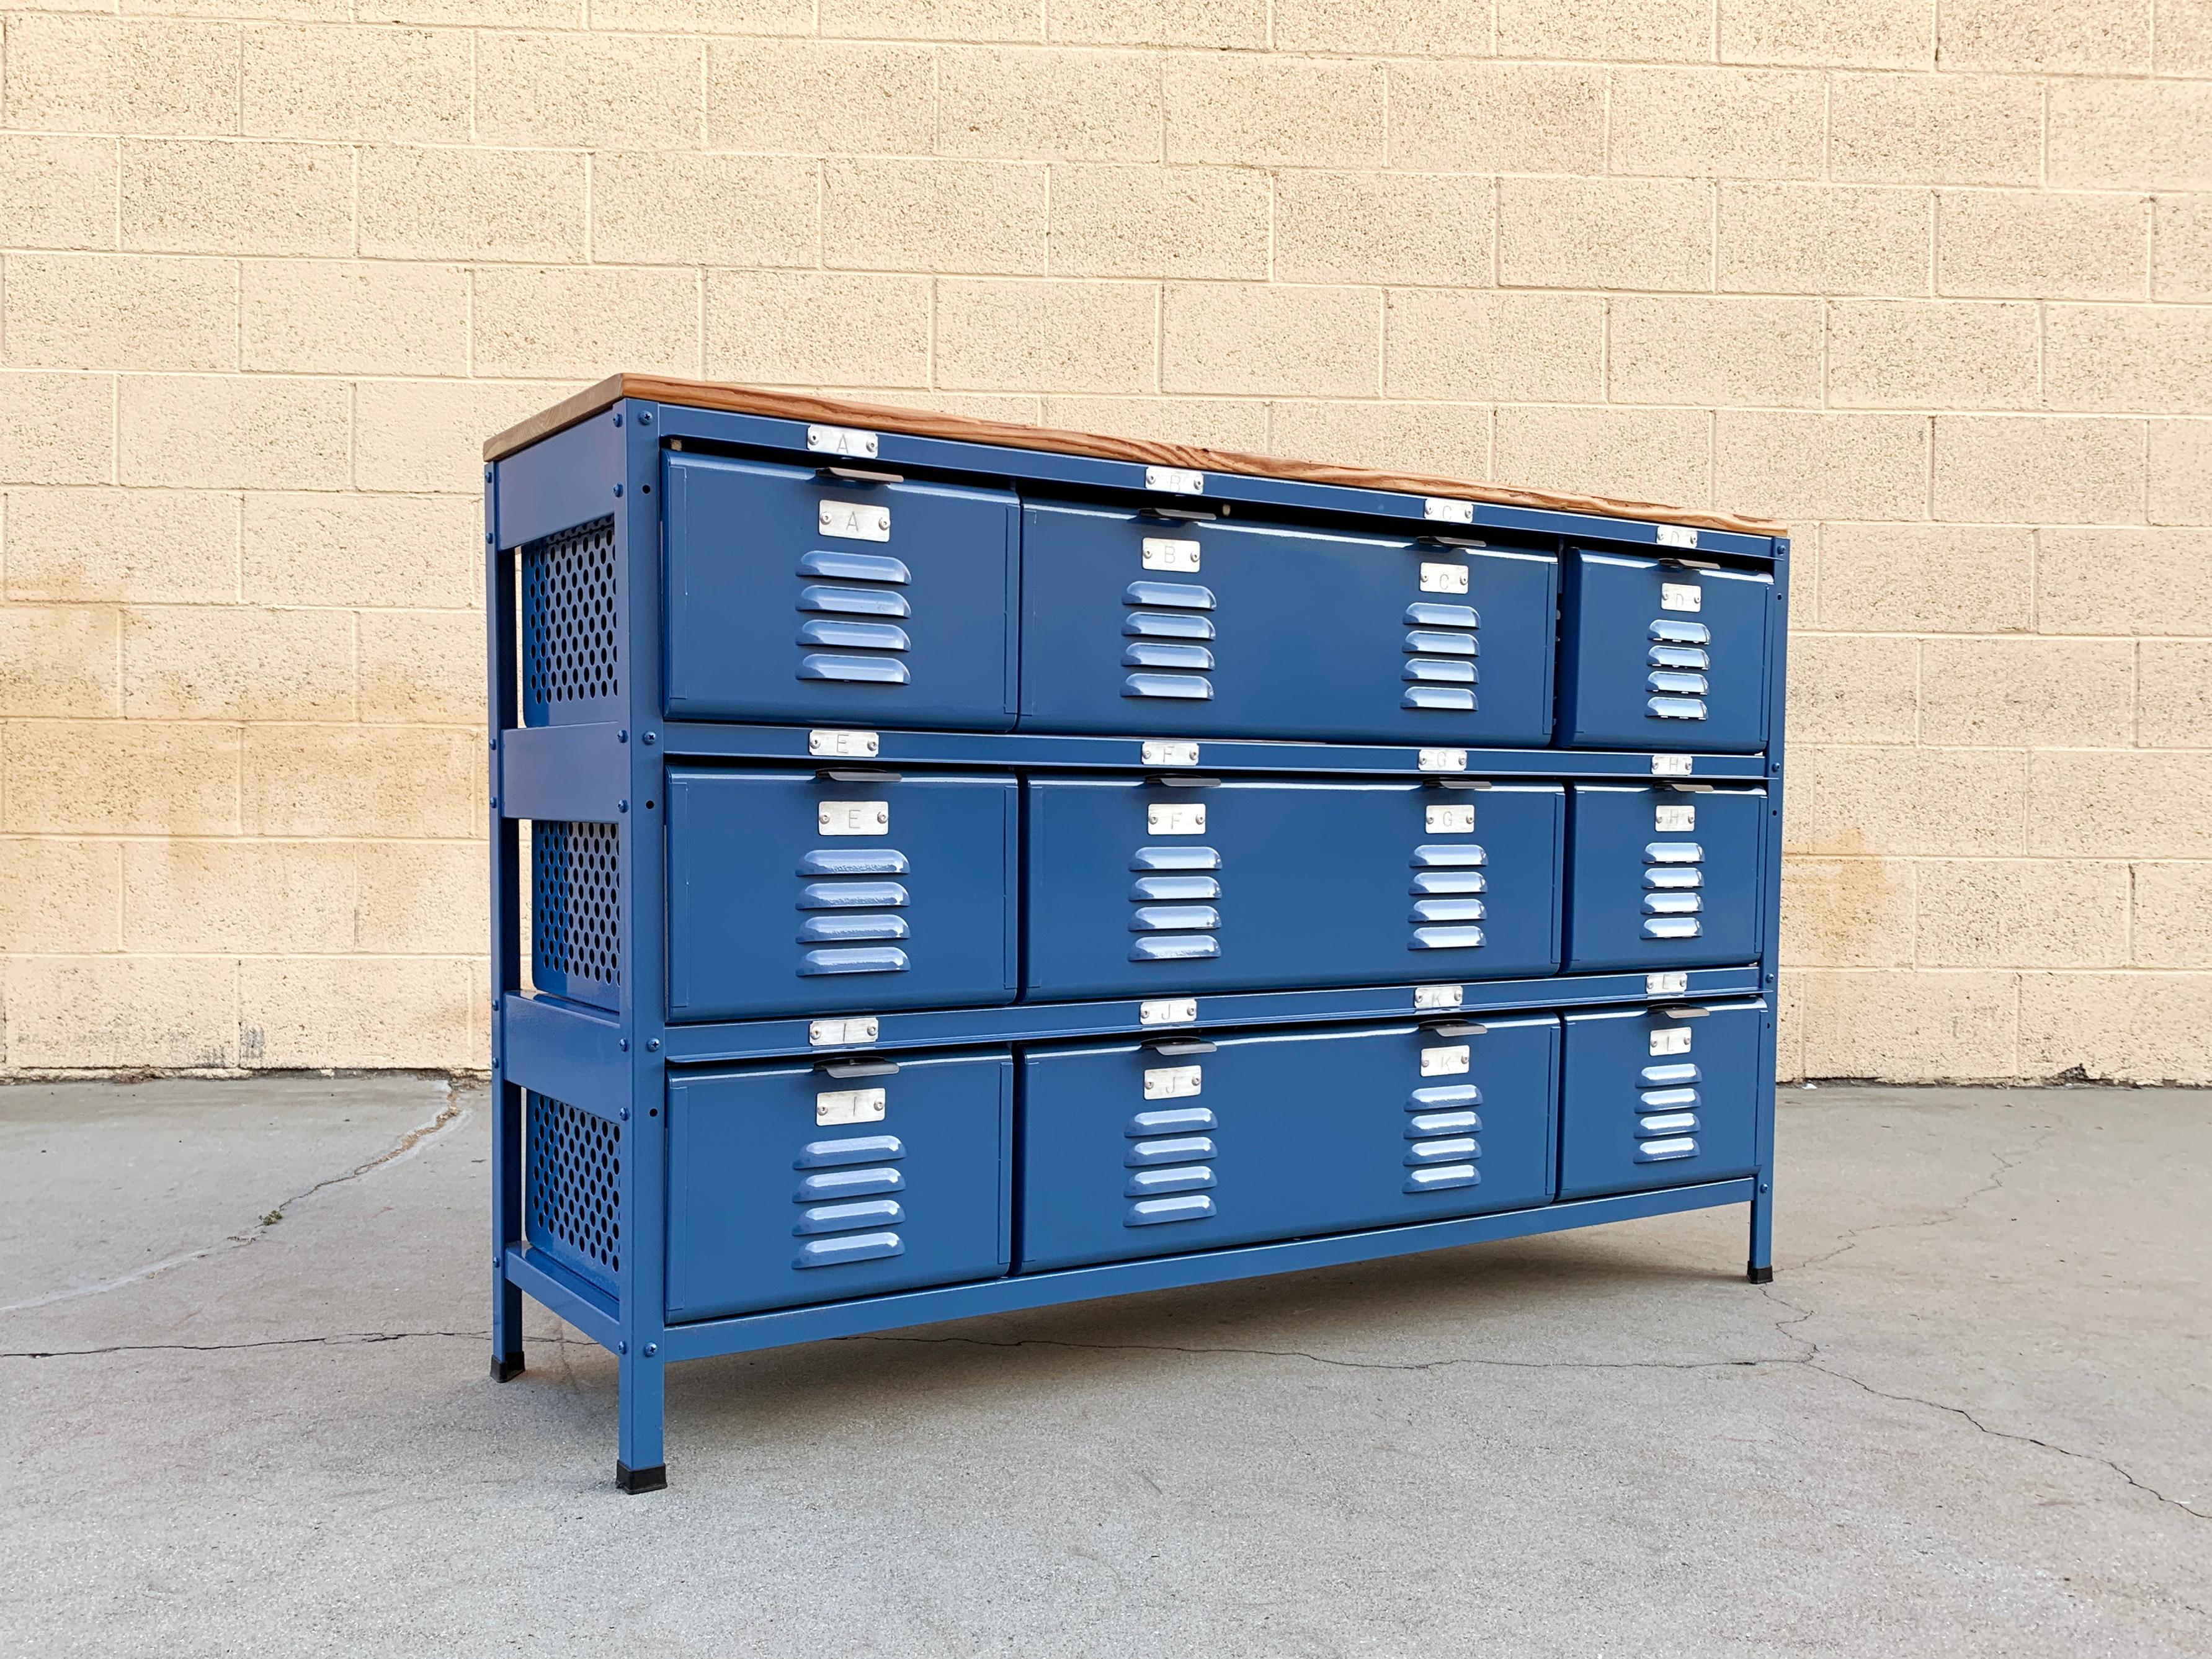 Return Policy: This is a custom made piece. All sales final on custom orders and custom fabrications.

Custom made 4 x 3 locker basket unit featuring a special reclaimed barn wood top.

Our all new, custom fabricated 4 wide x 3 high locker